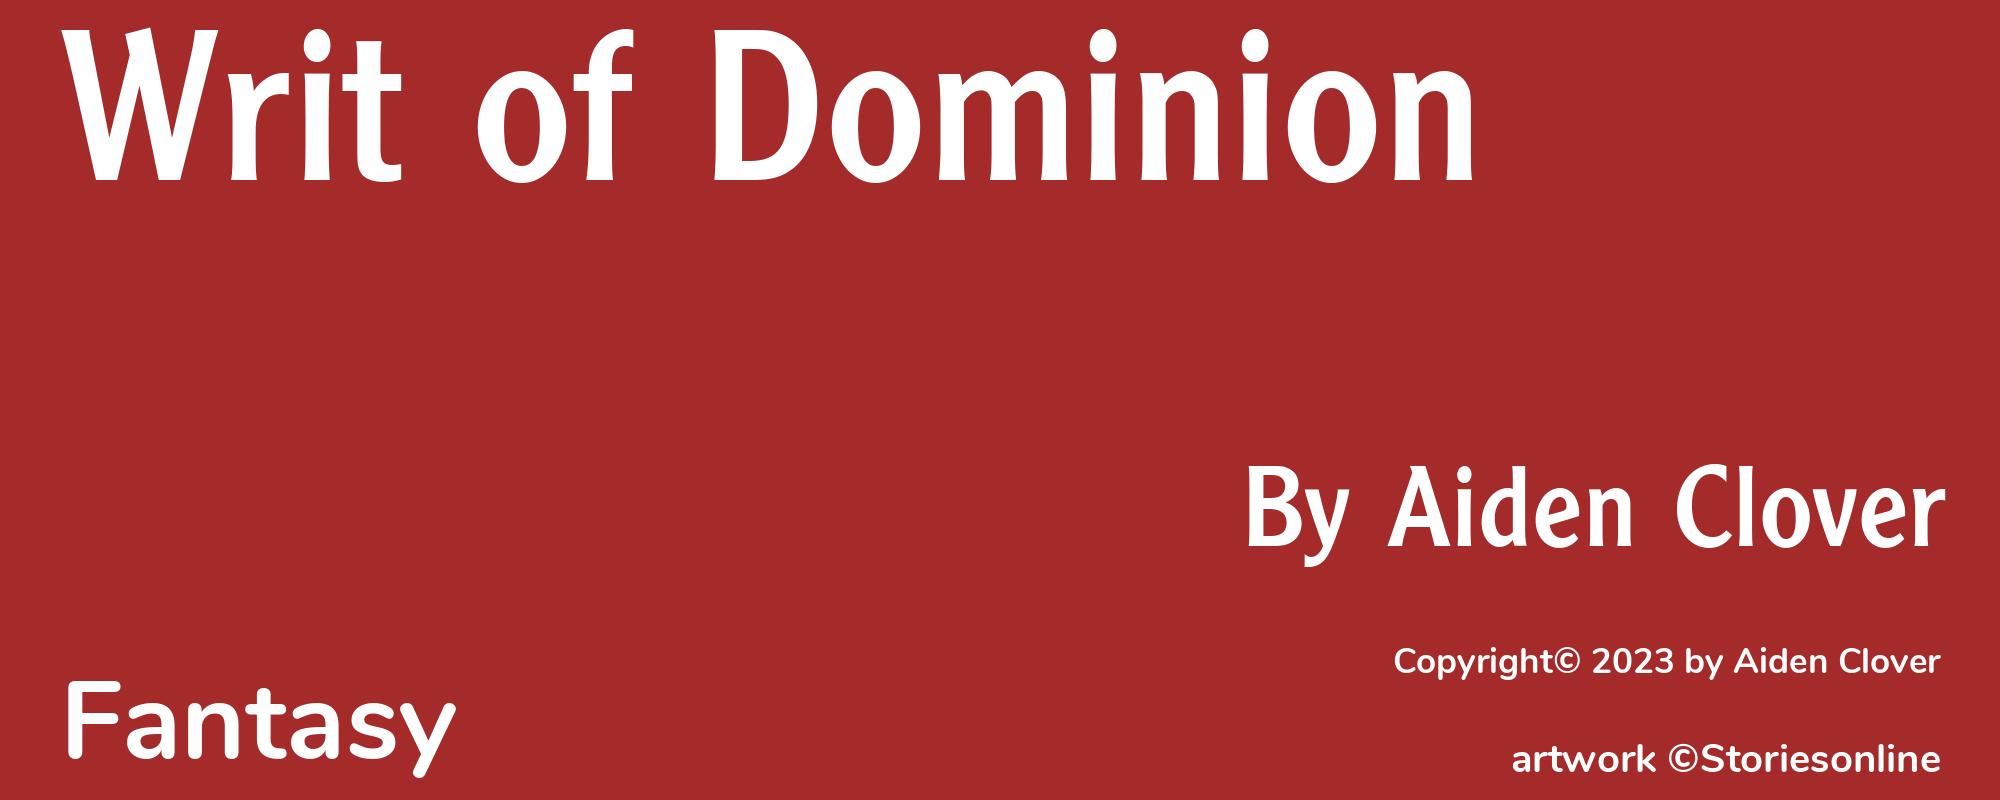 Writ of Dominion - Cover